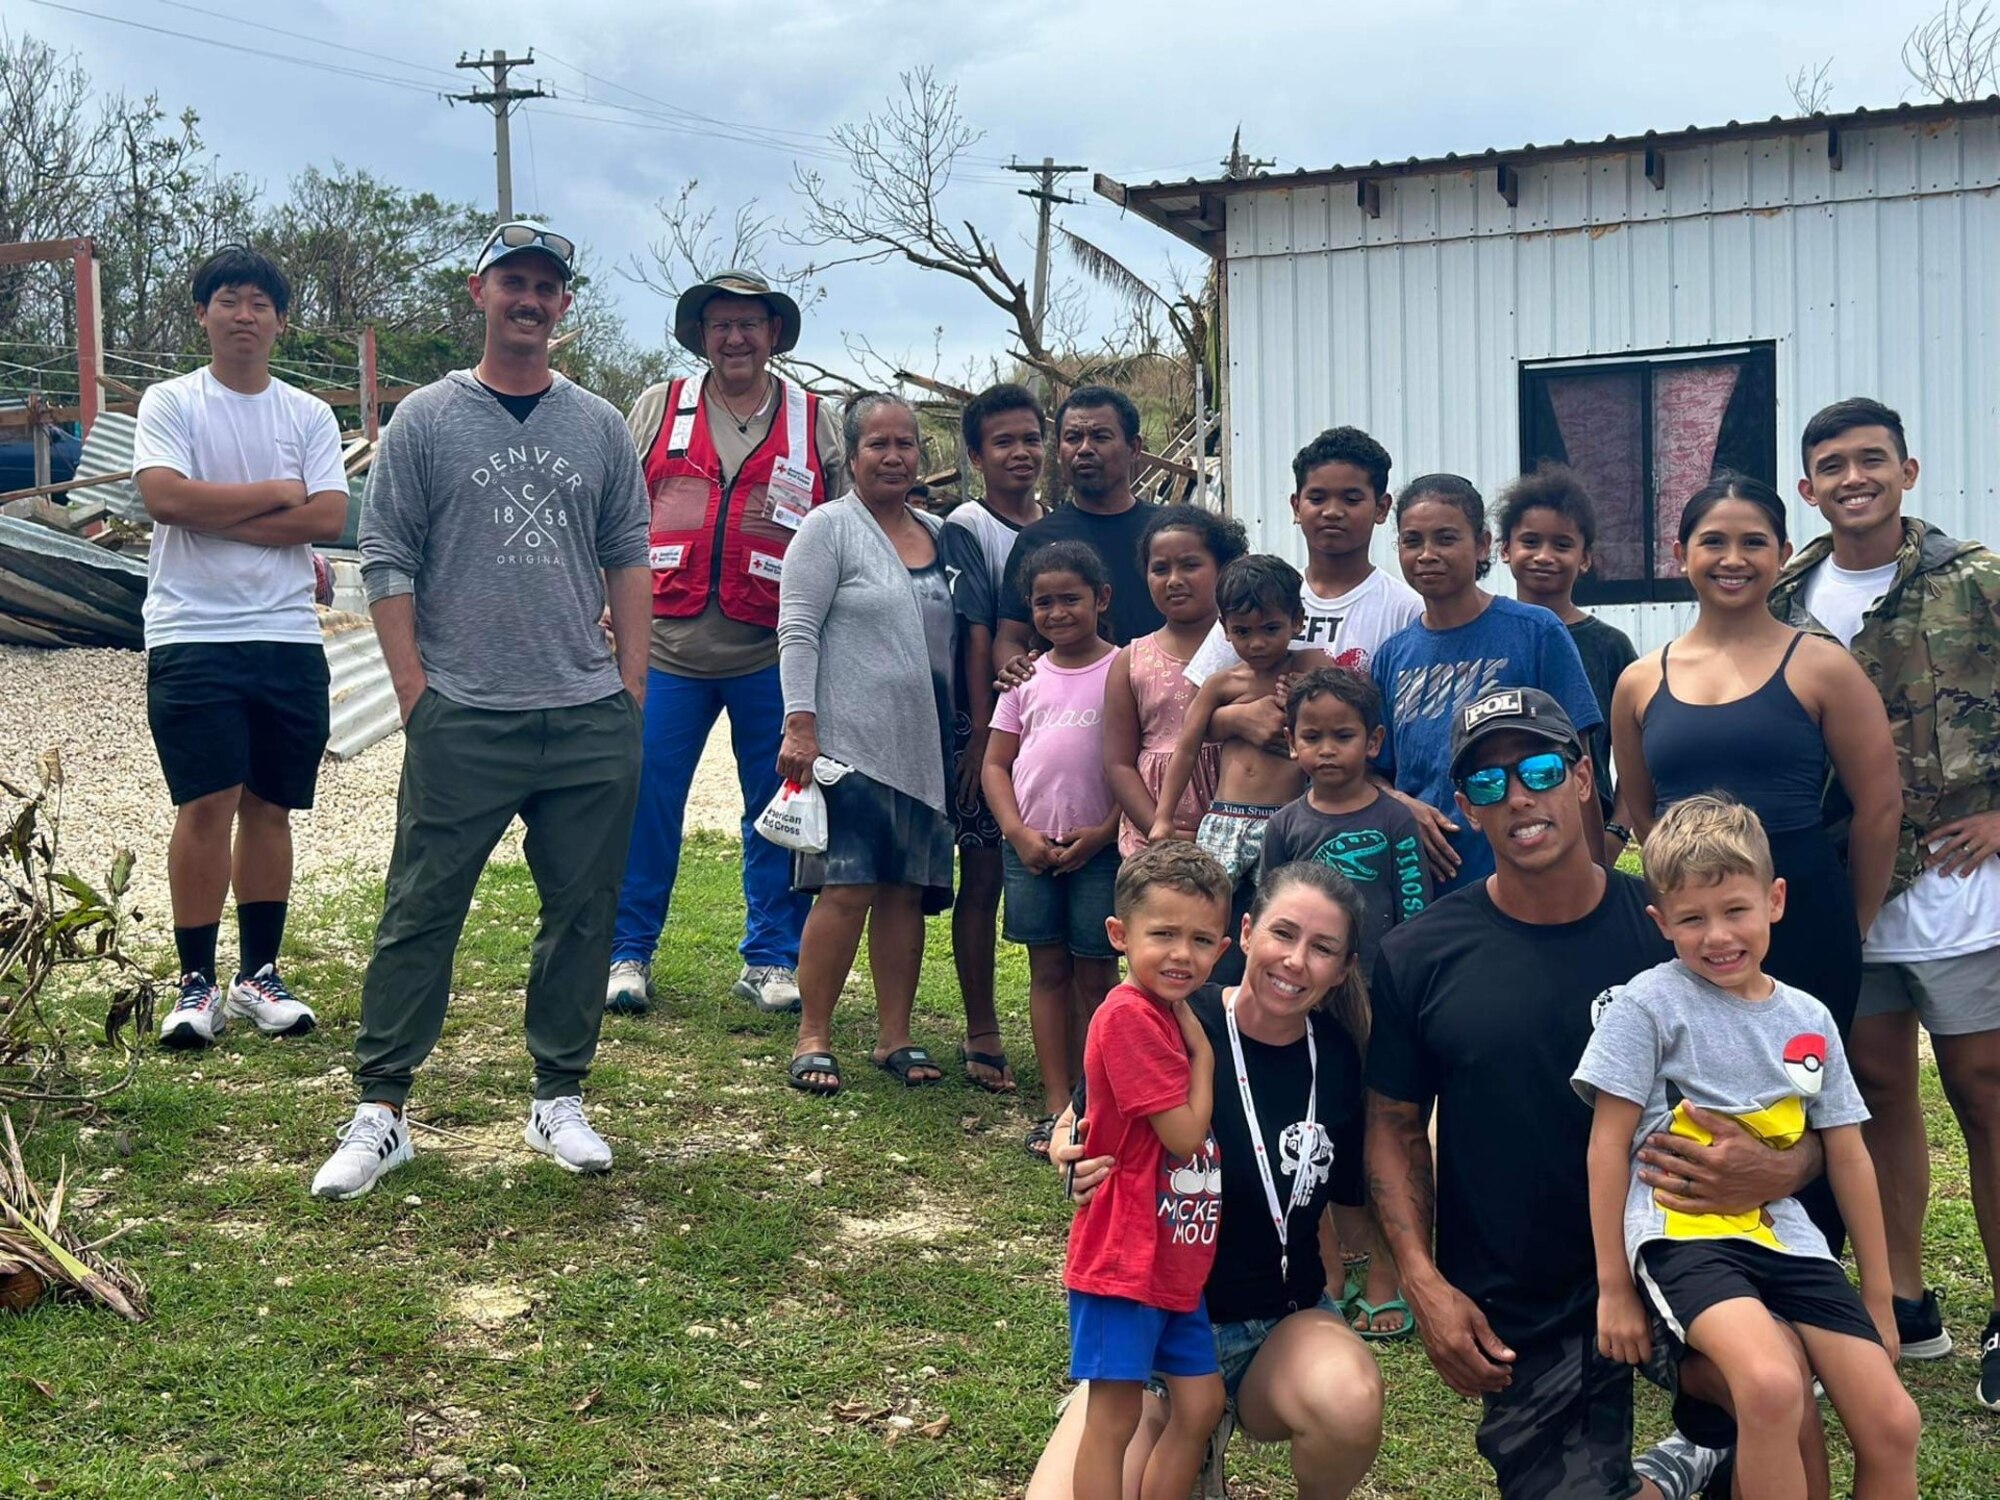 U.S. Air Force Tech. Sgt. Mark Eastman, second from left, 51st Logistics Readiness Squadron fuels distribution NCOIC, poses for a photo with other Typhoon Mawar recovery volunteers and locals near Andersen Air Force Base, Guam. Eastman and his team assisted the Red Cross in delivering aid to remote villages by visiting 1,300 families and distributing over 103,000 pounds of aid. (Courtesy photo)